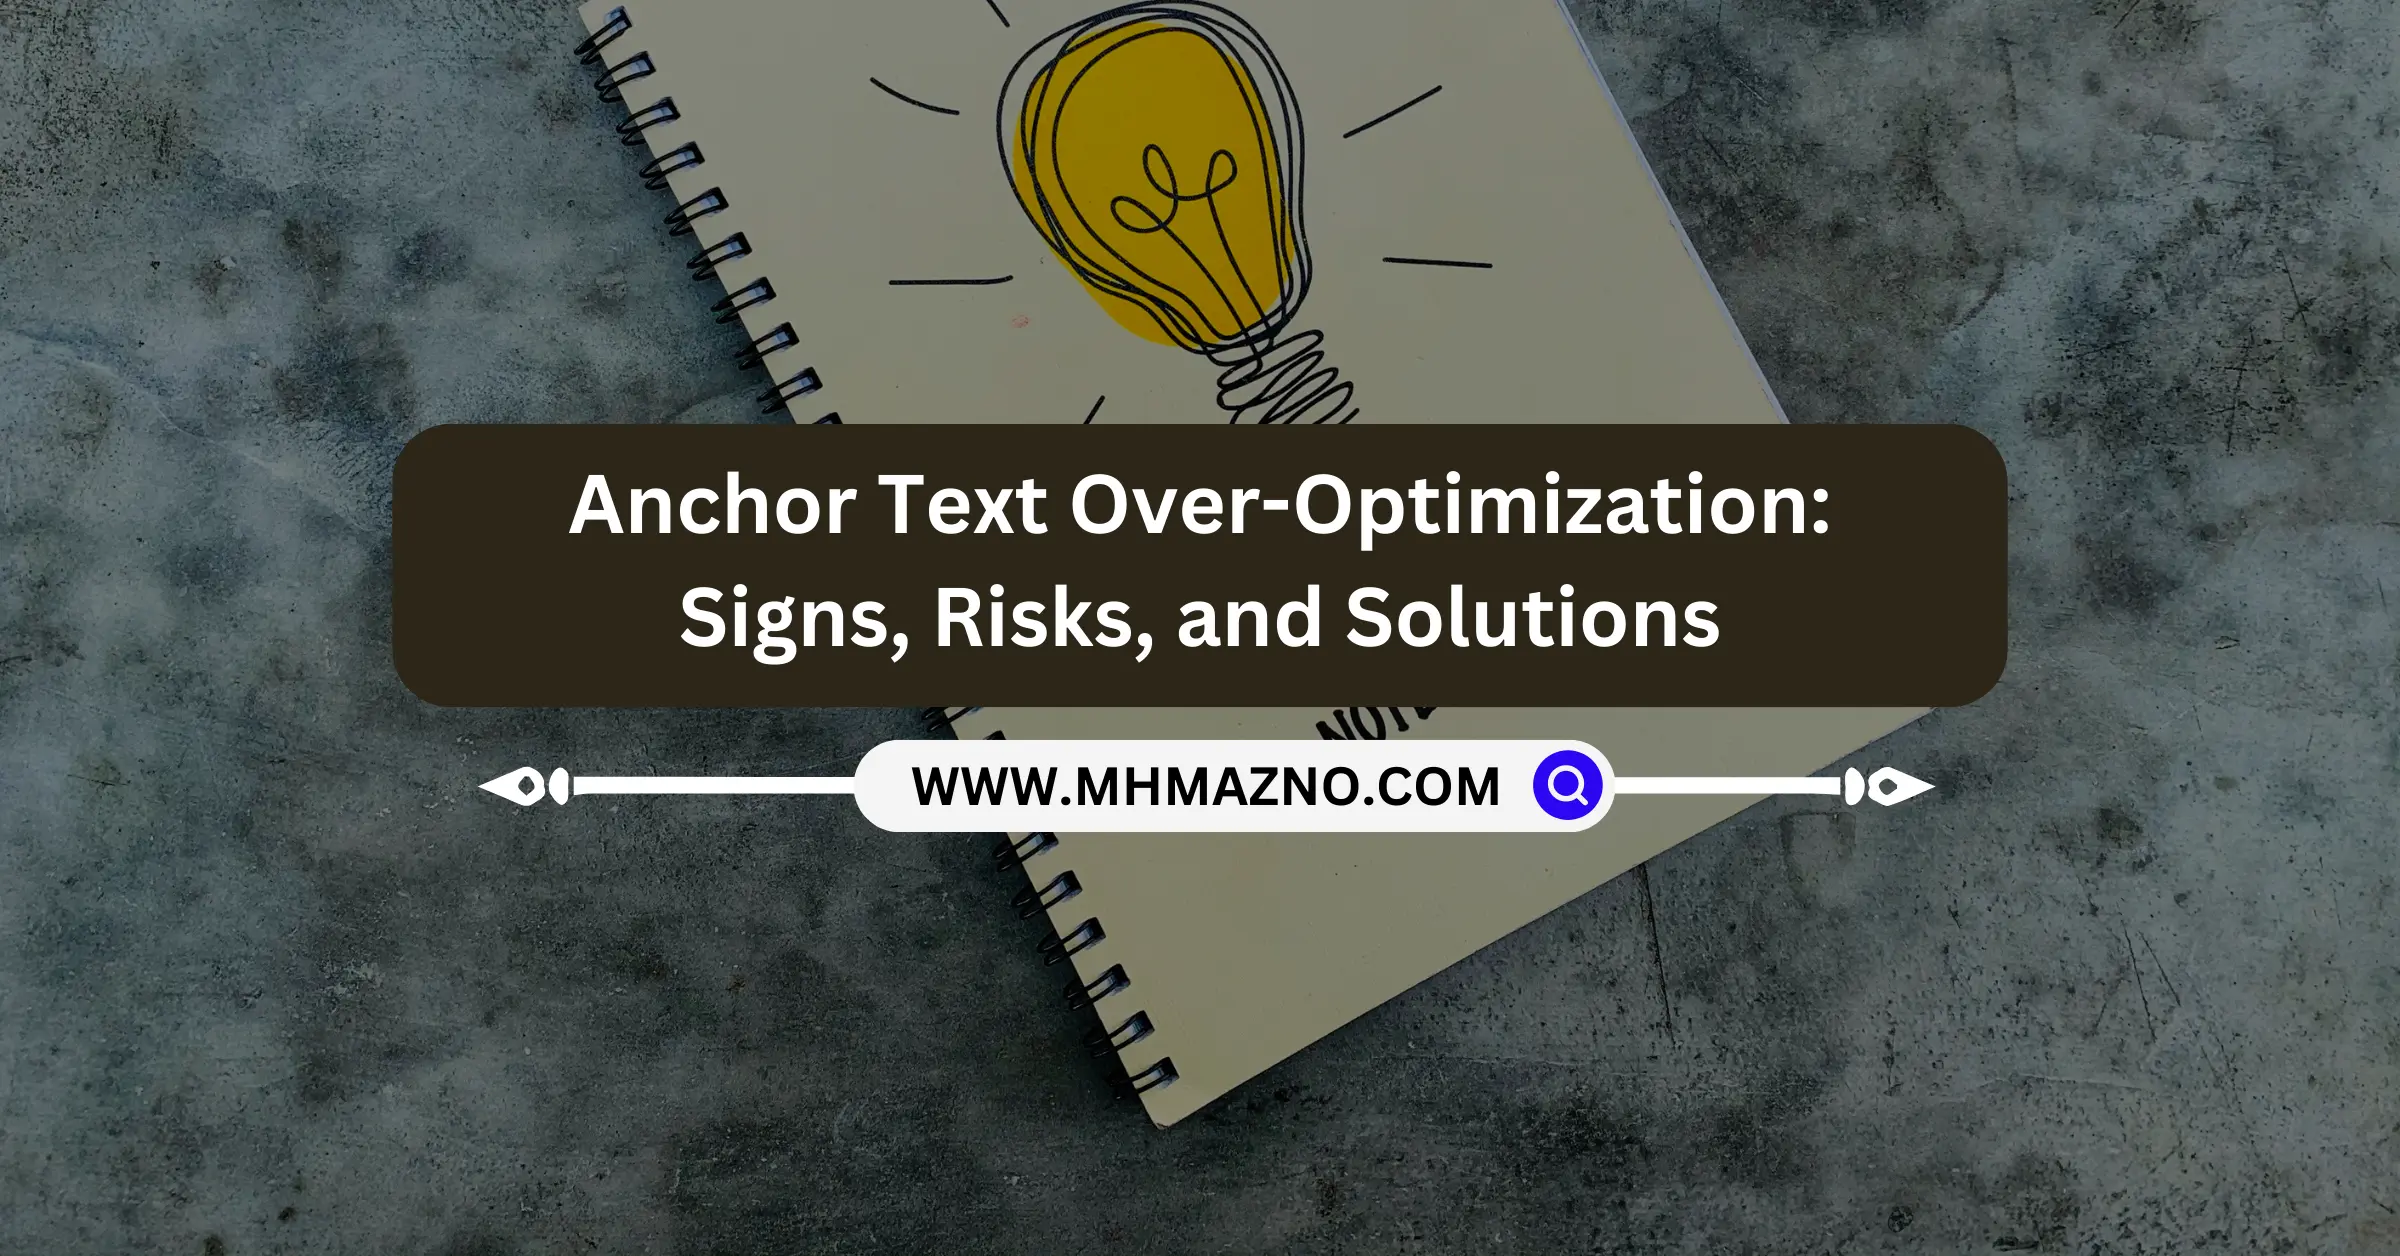 Anchor Text Over-Optimization Signs, Risks, and Solutions